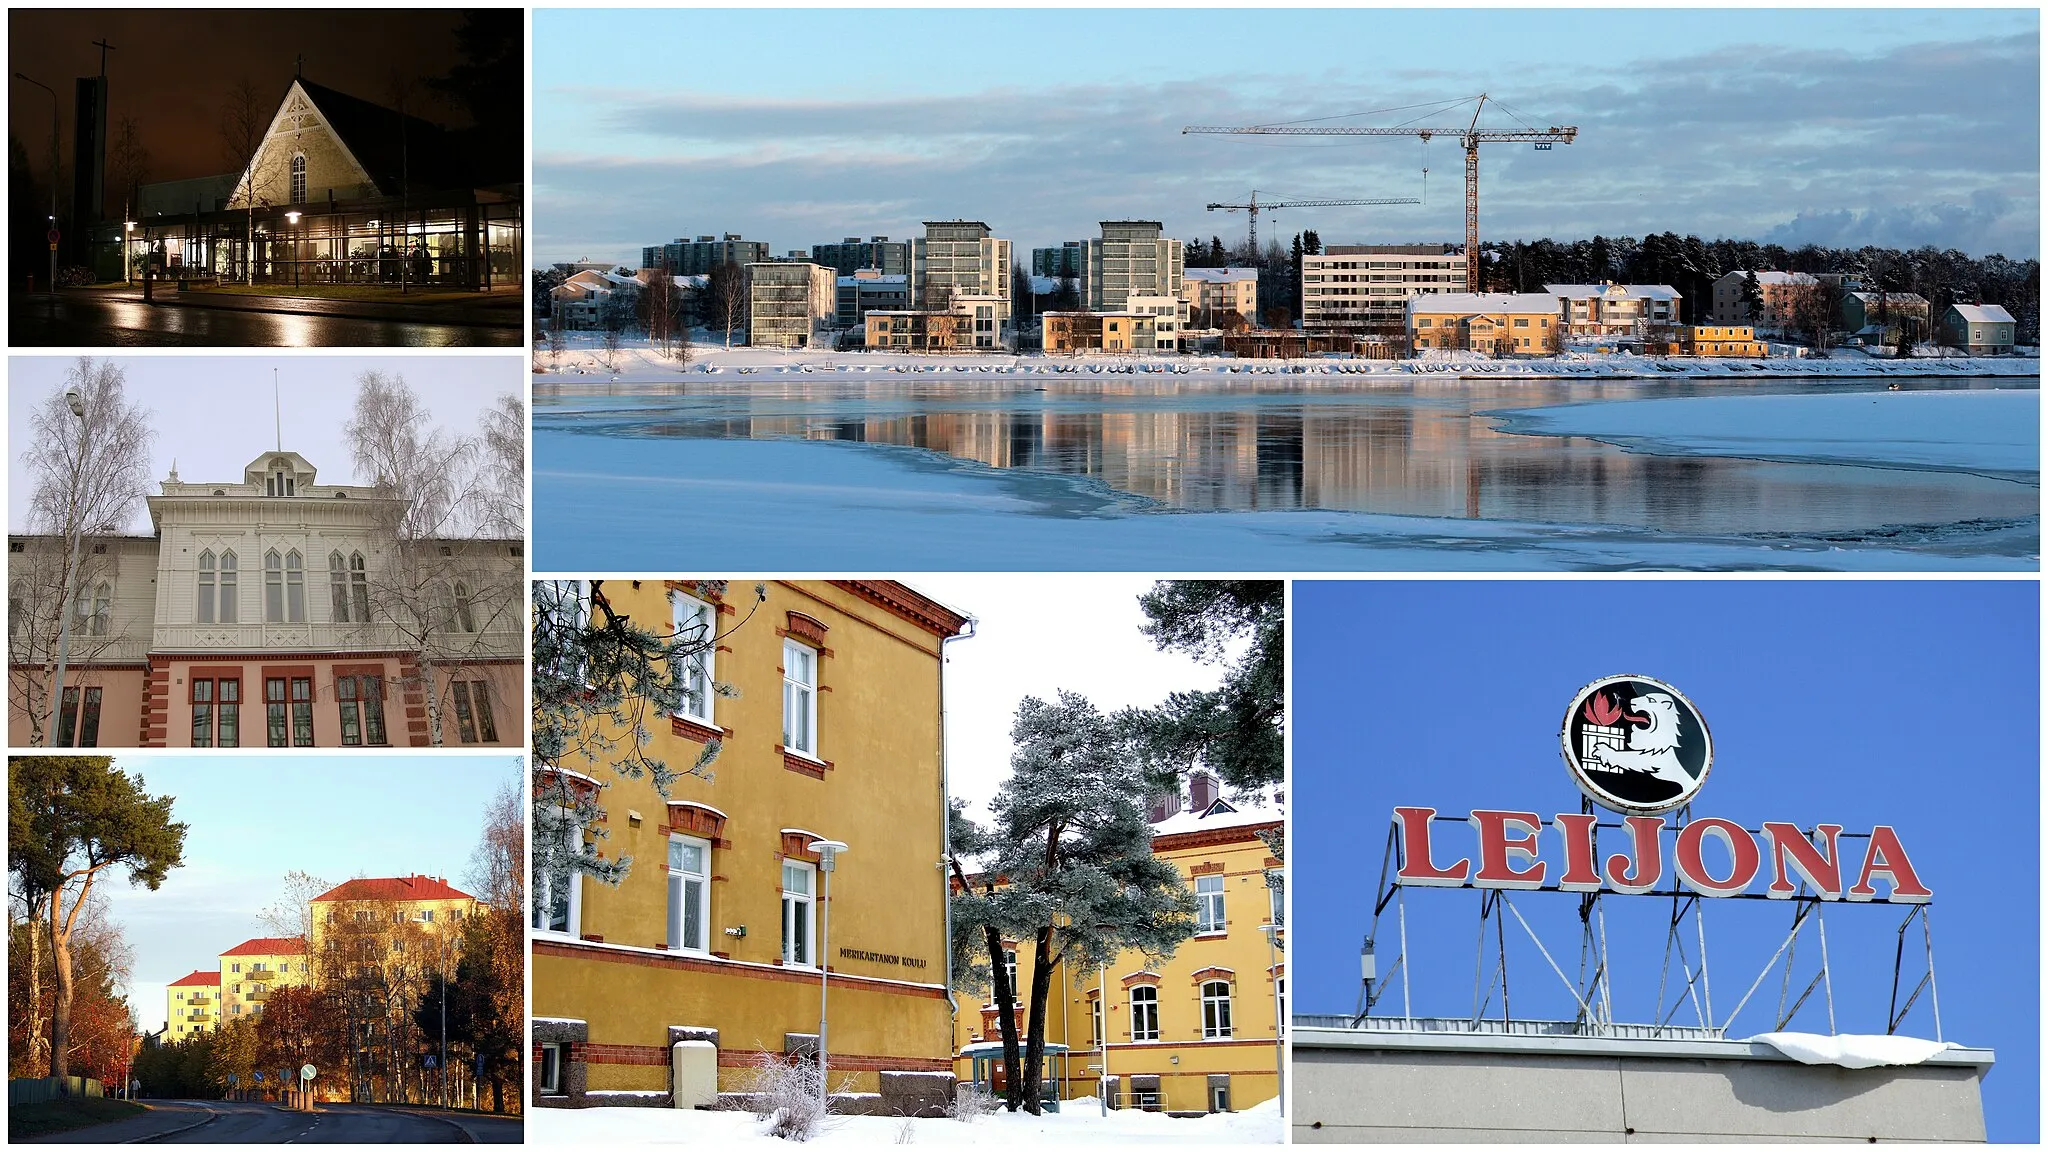 Photo showing: Montage of Tuira, Oulu.